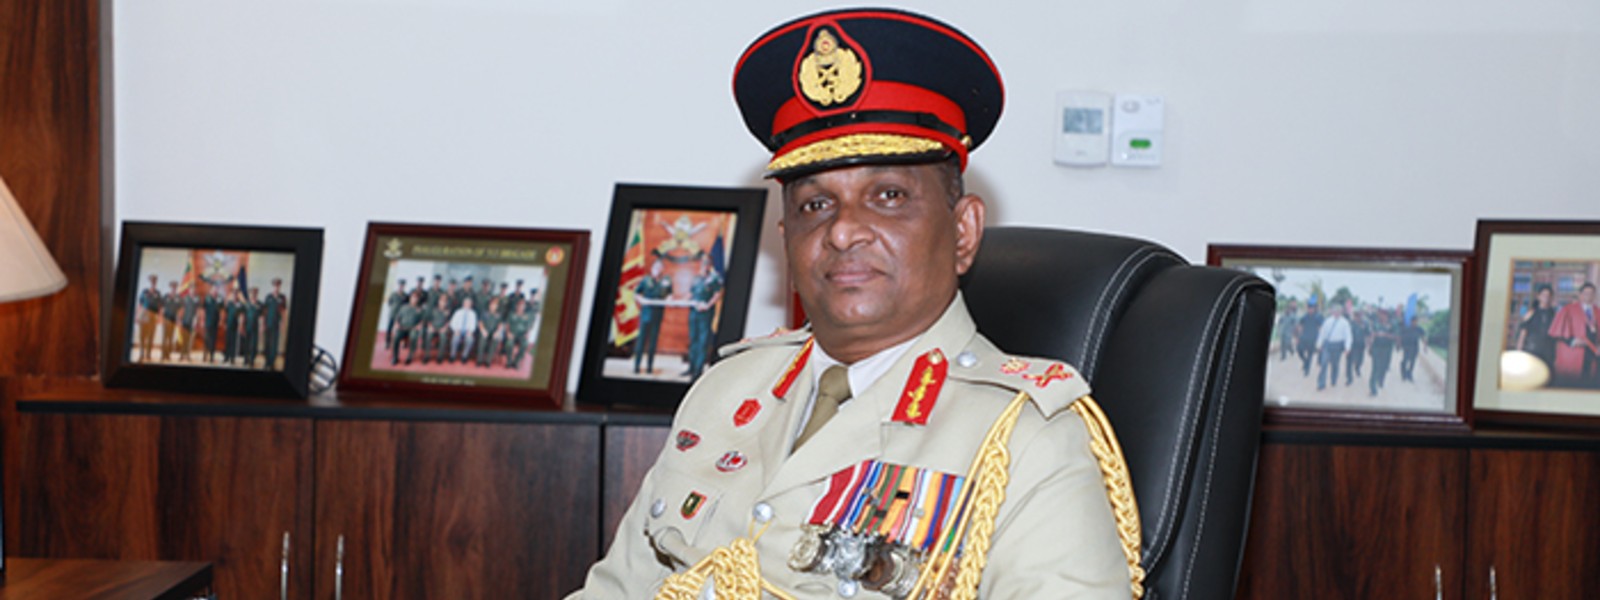 58th Chief of Staff of the Army assumed duties